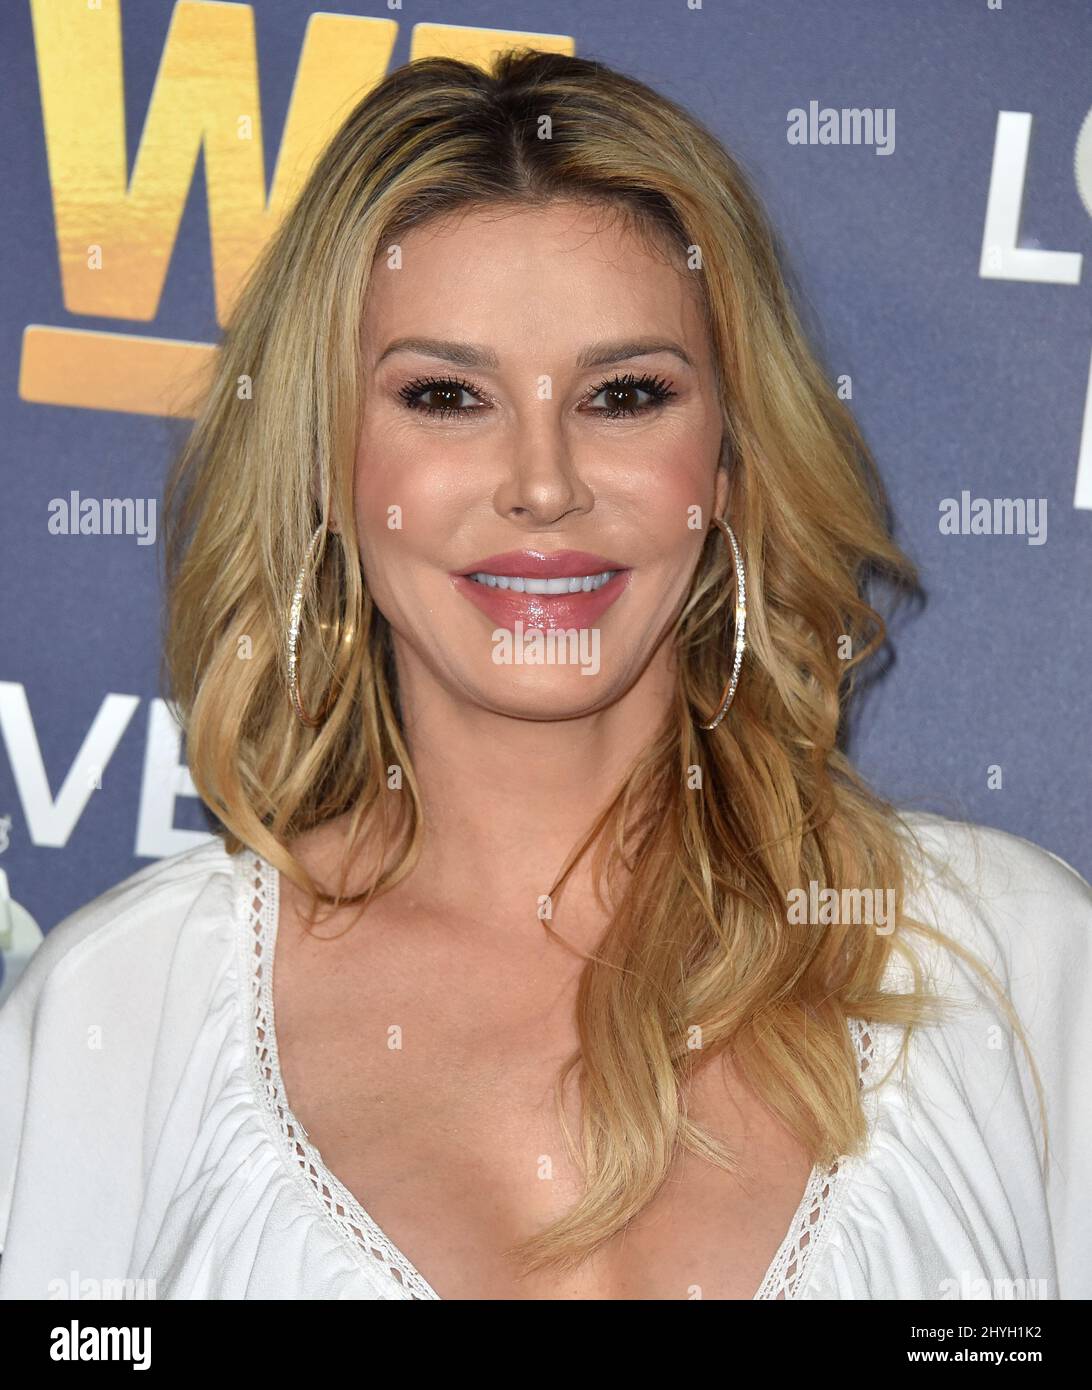 Brandi Glanville at WE tv's Real Love: Relationship Reality TV's Past, Present & Future held at The Paley Center for Media on December 11, 2018 in Beverly Hills, CA. Stock Photo